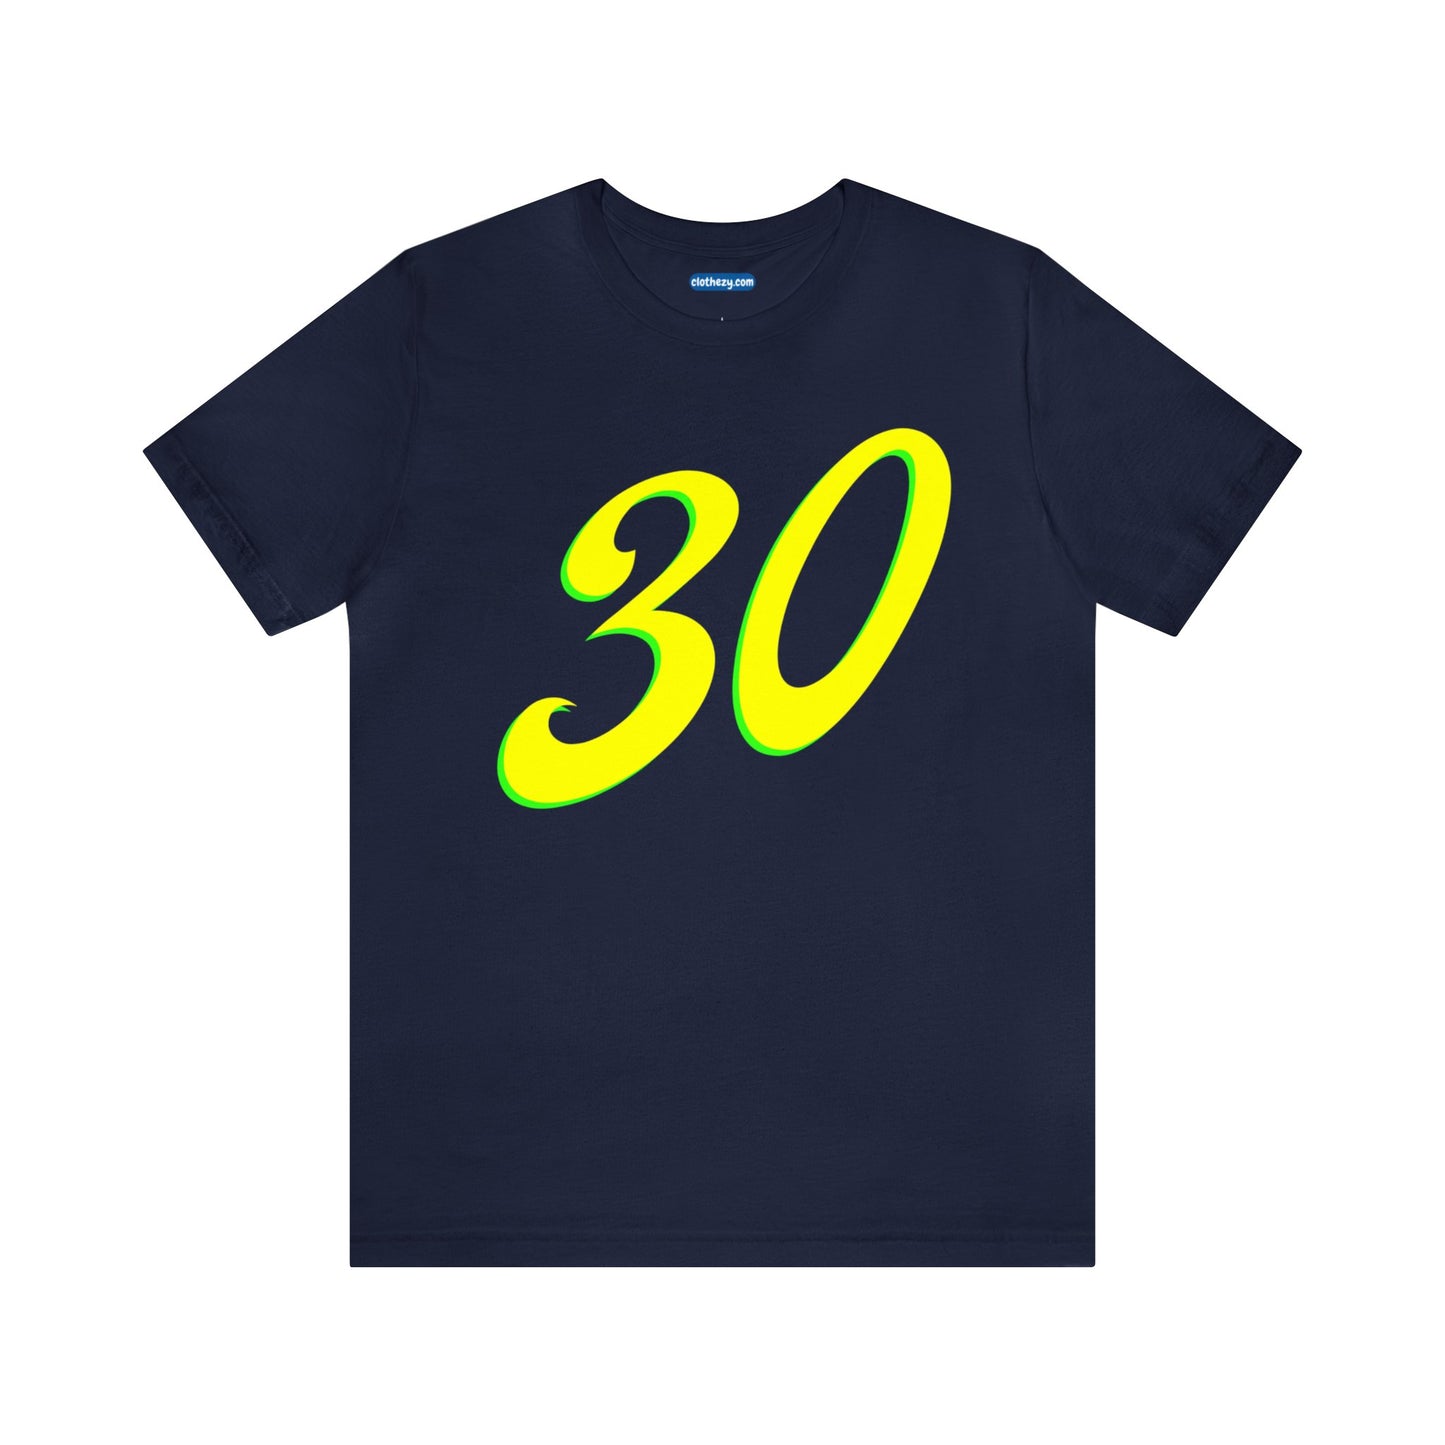 Number 30 Design - Soft Cotton Tee for birthdays and celebrations, Gift for friends and family, Multiple Options by clothezy.com in Navy Size Small - Buy Now